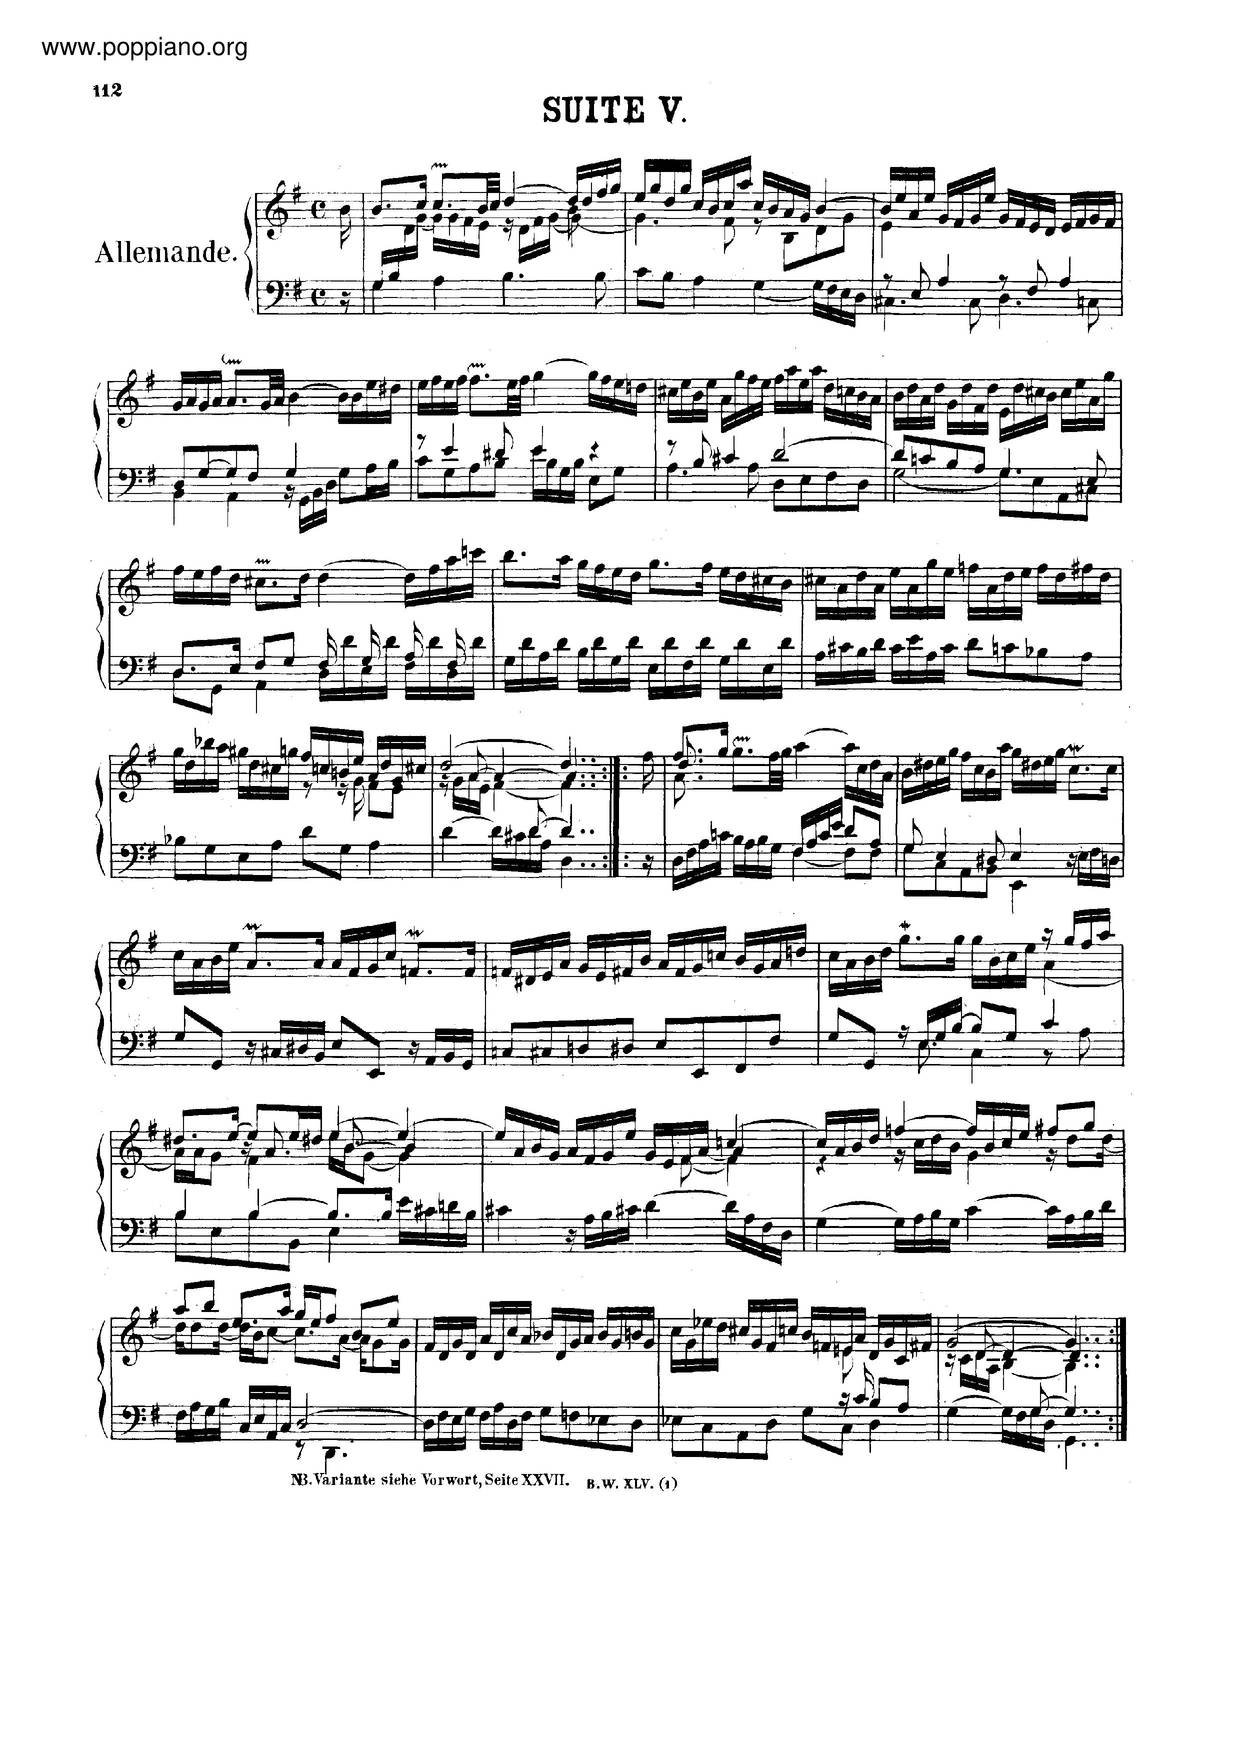 French Suite No. 5 In G Major, BWV 816ピアノ譜